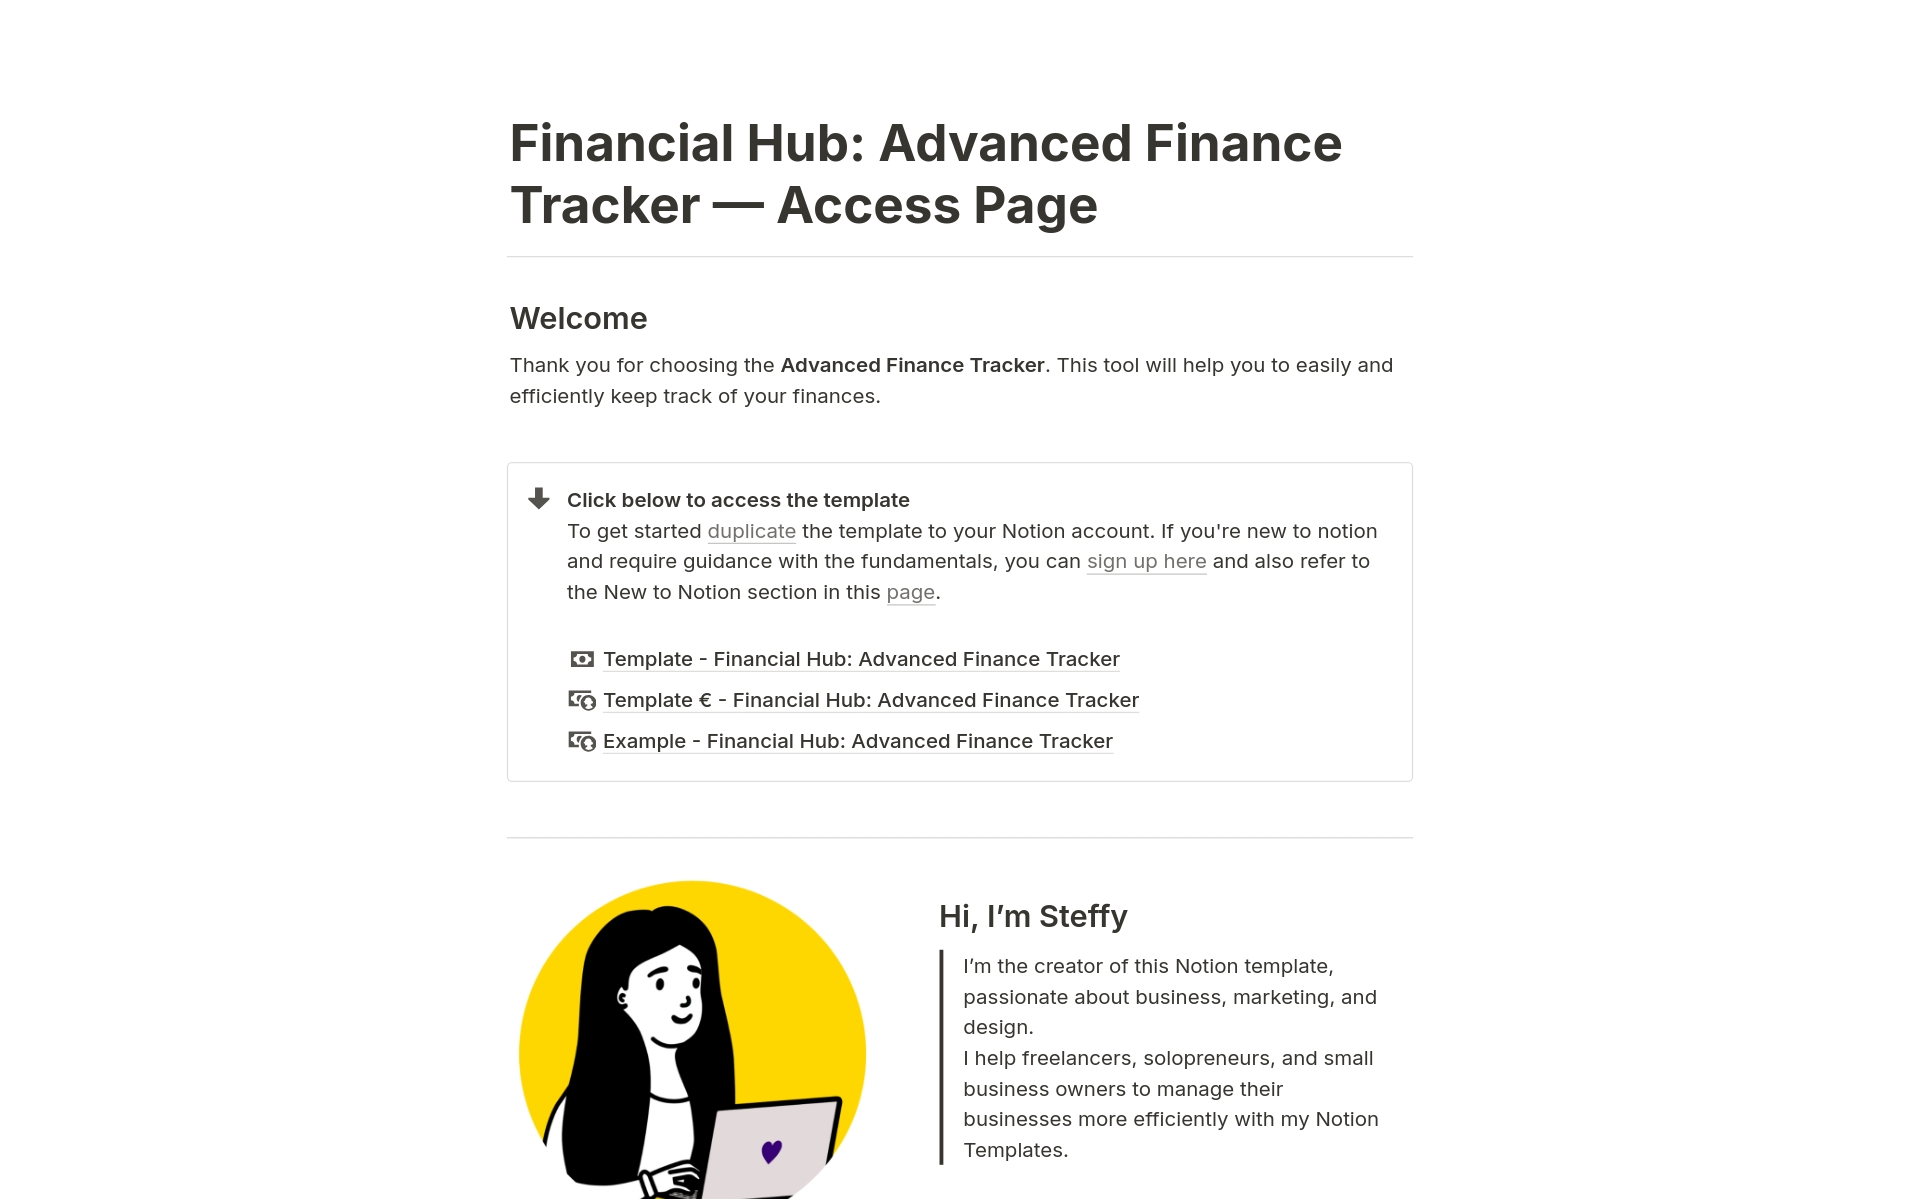 Manage and track your Personal & Business Finances in one central place